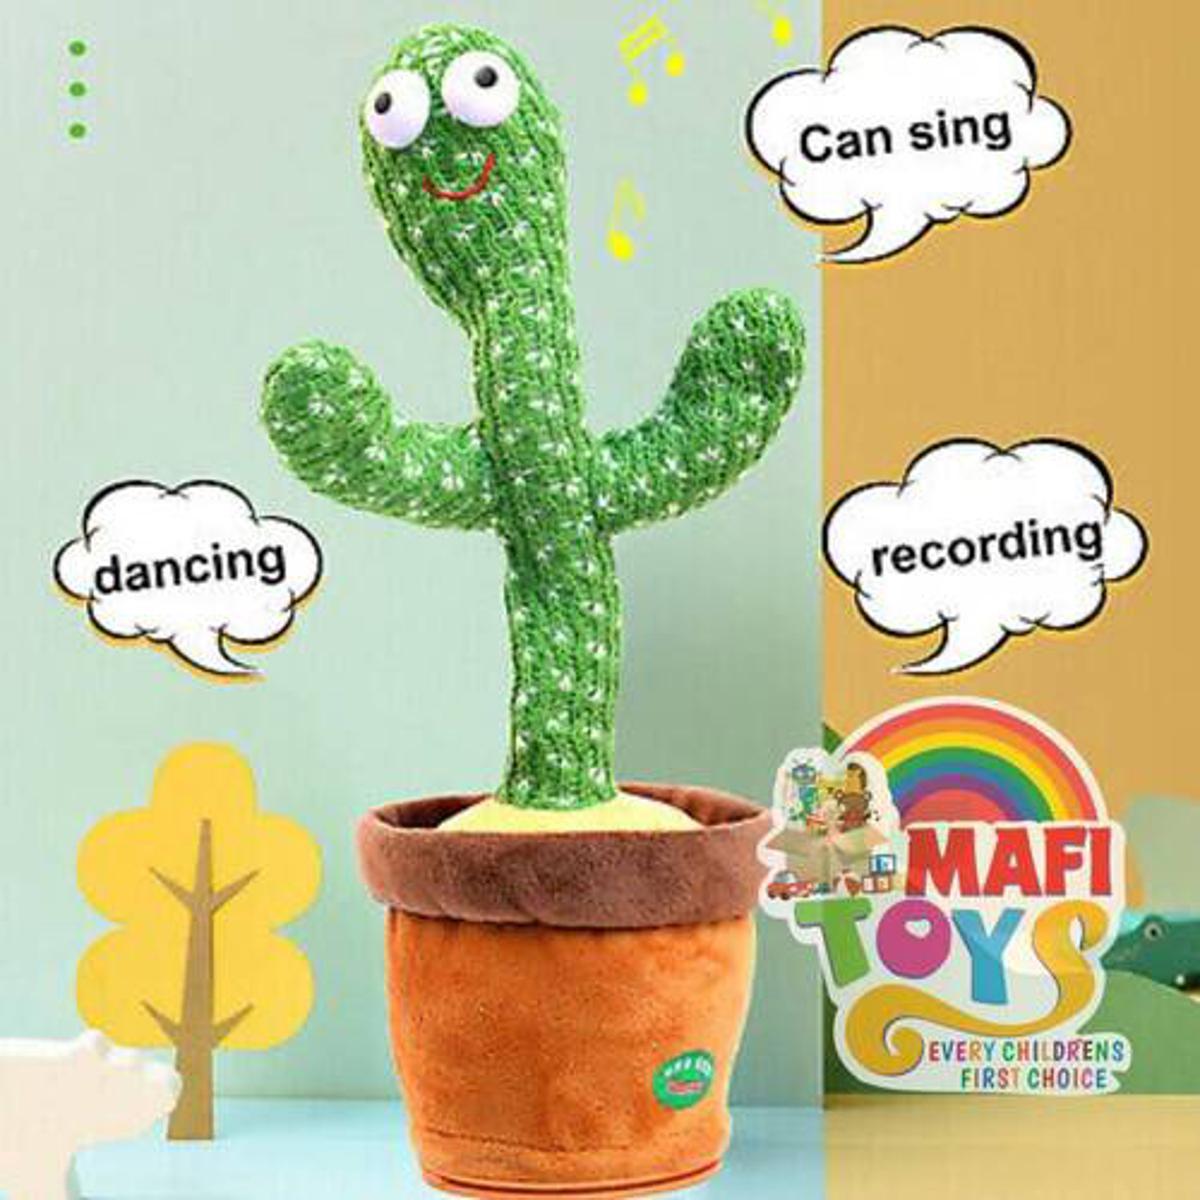 Danching castus talking castus stuffed plush toy electronic toy with song plush castus potted toy early education toy for kids